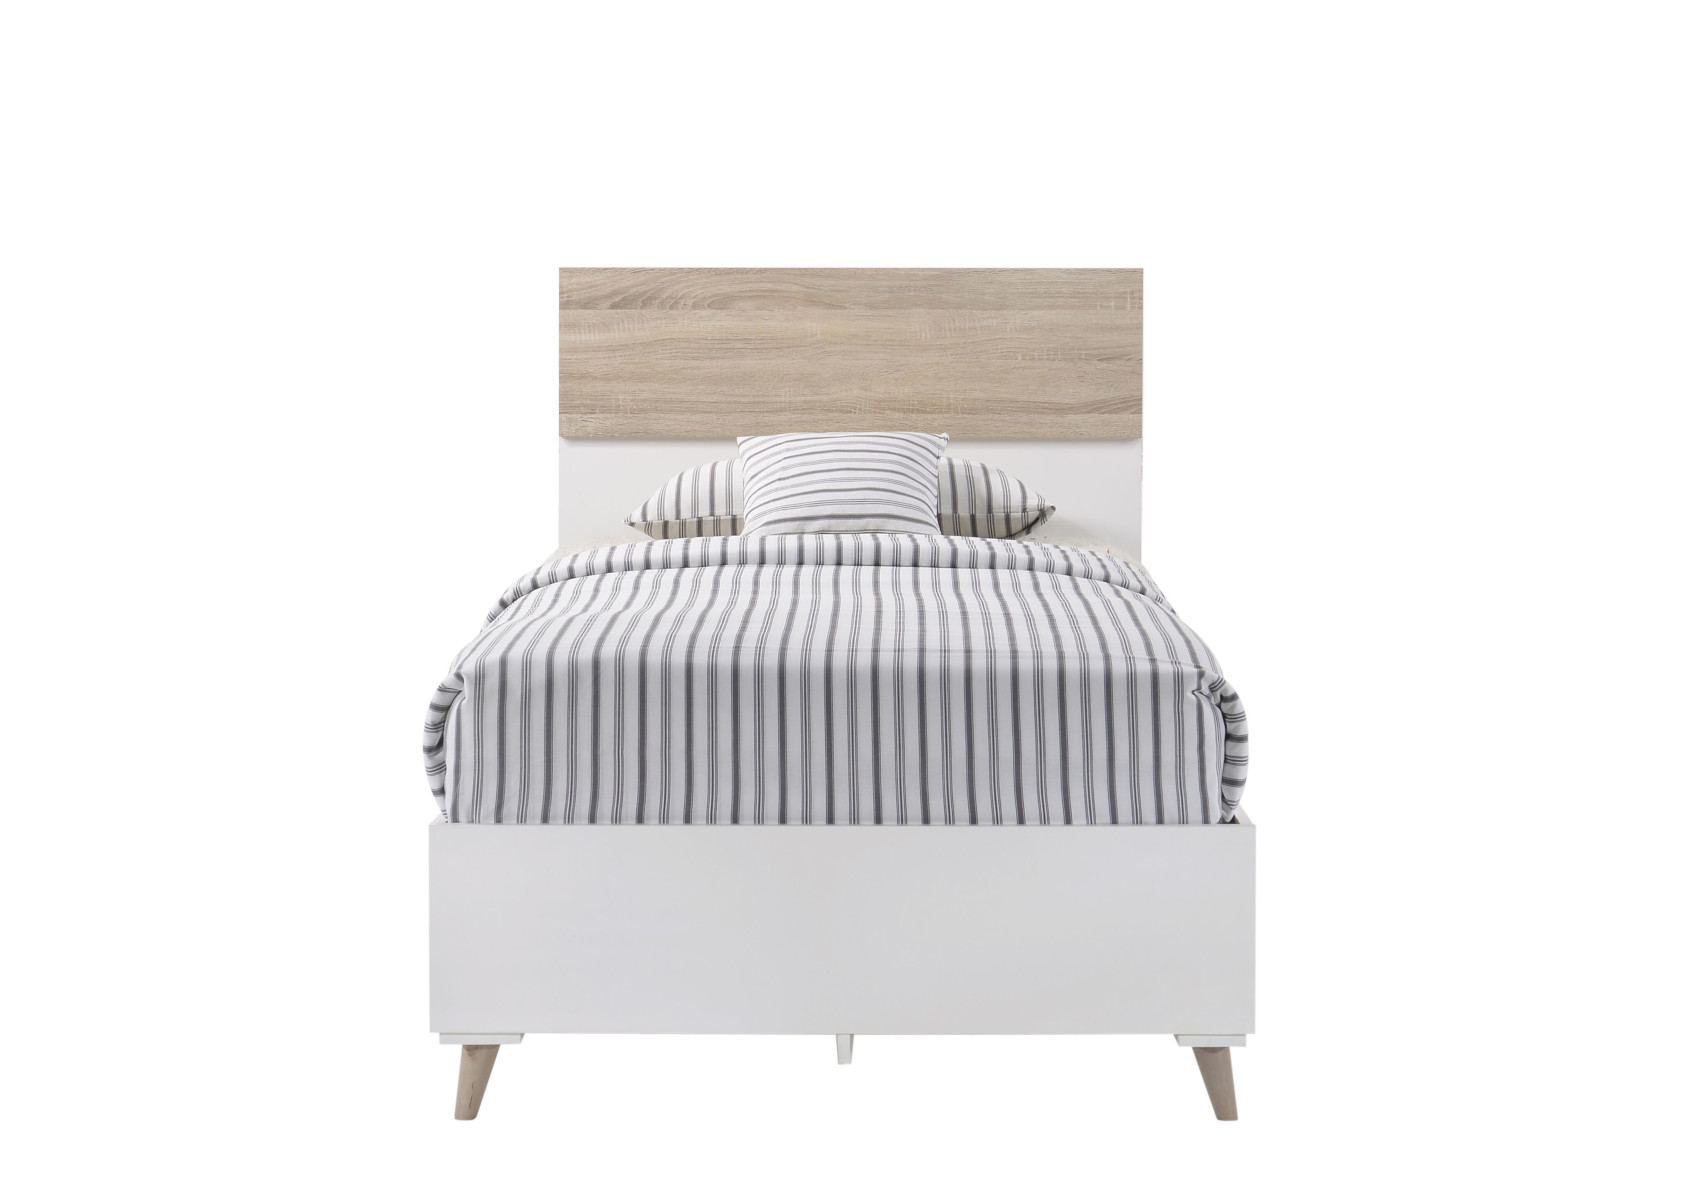 View Stockholm White Single Bed Frame Time4Sleep information